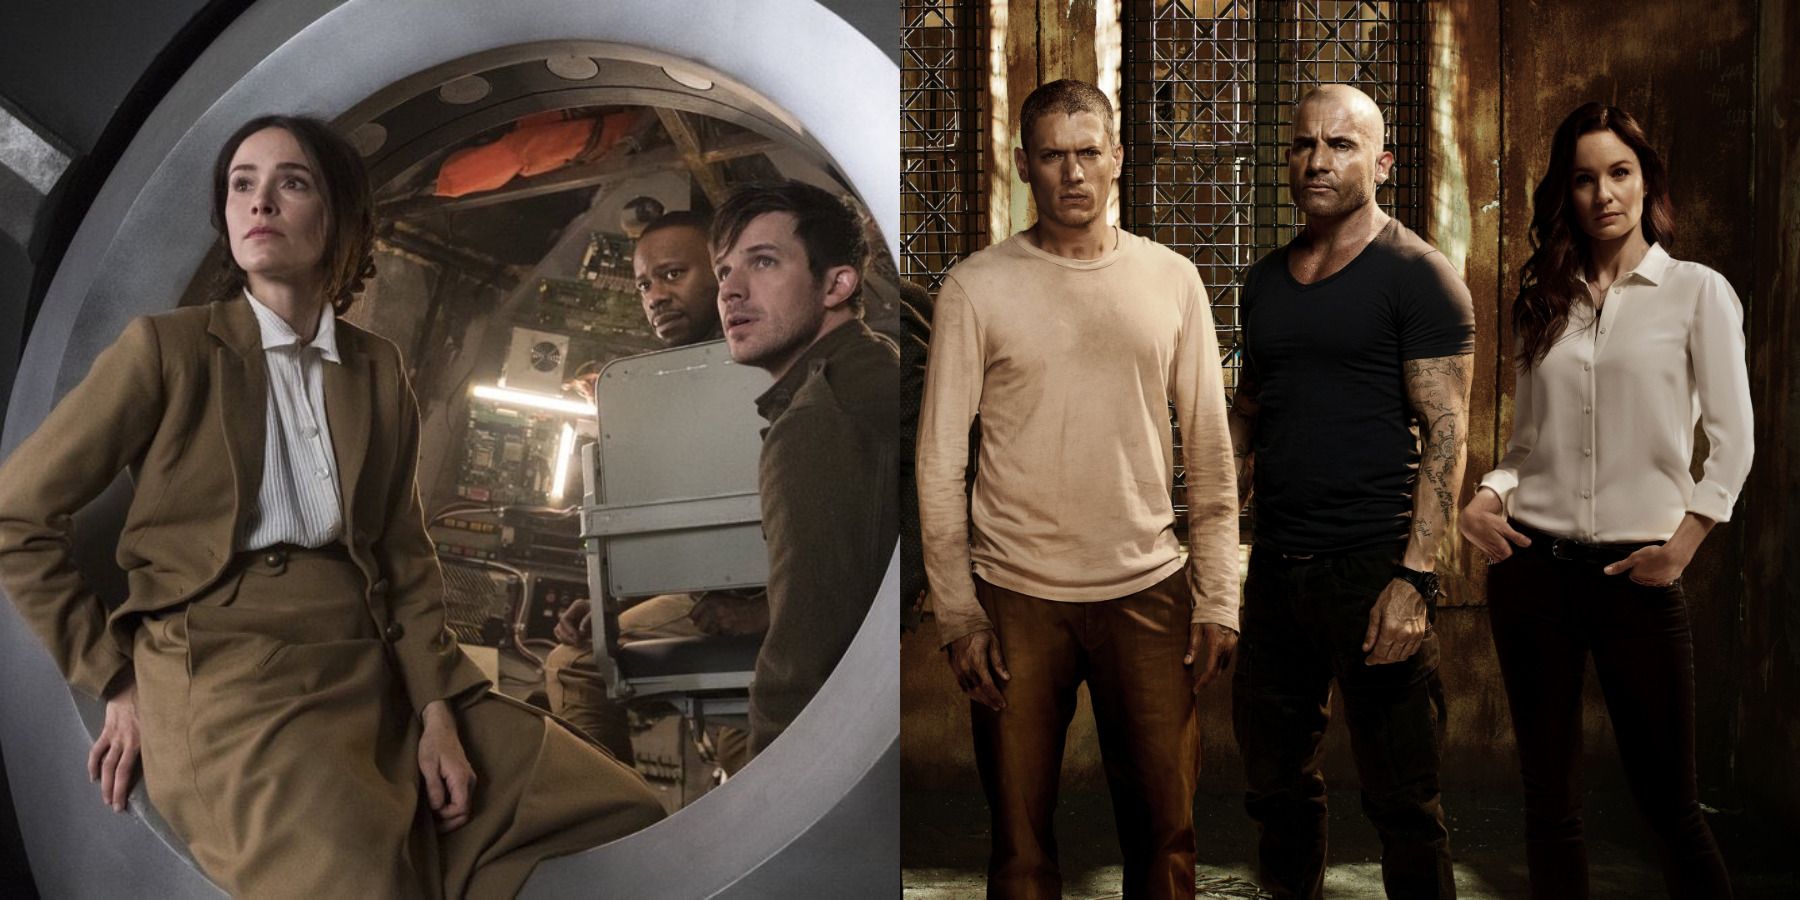 Canceled and revived shows feature split image Timeless and Prison Break